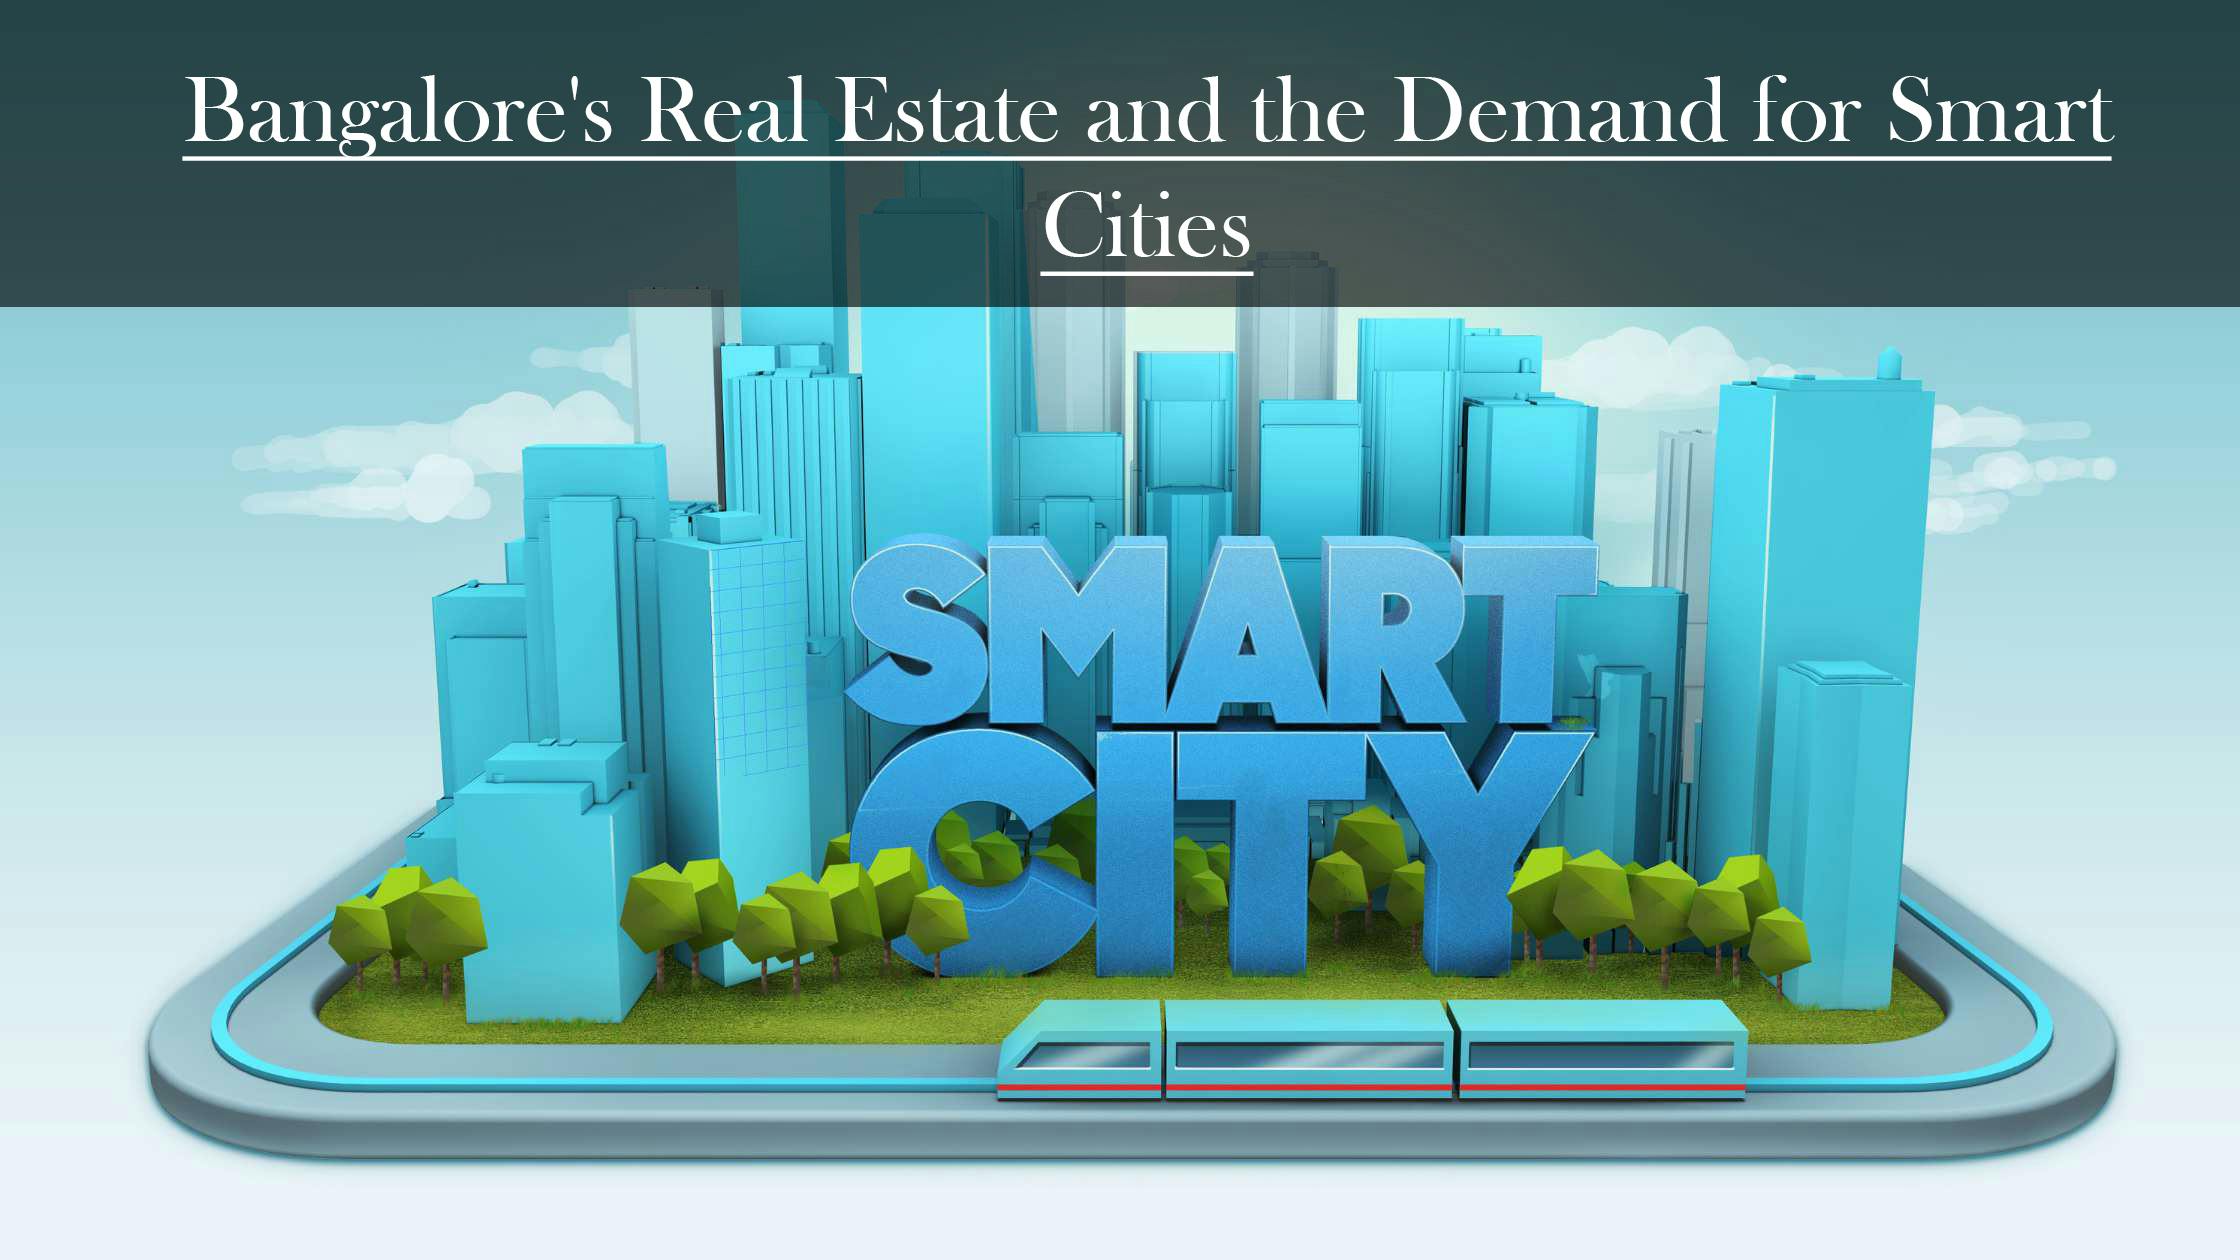 Bangalore's Real Estate and the Demand for Smart Cities